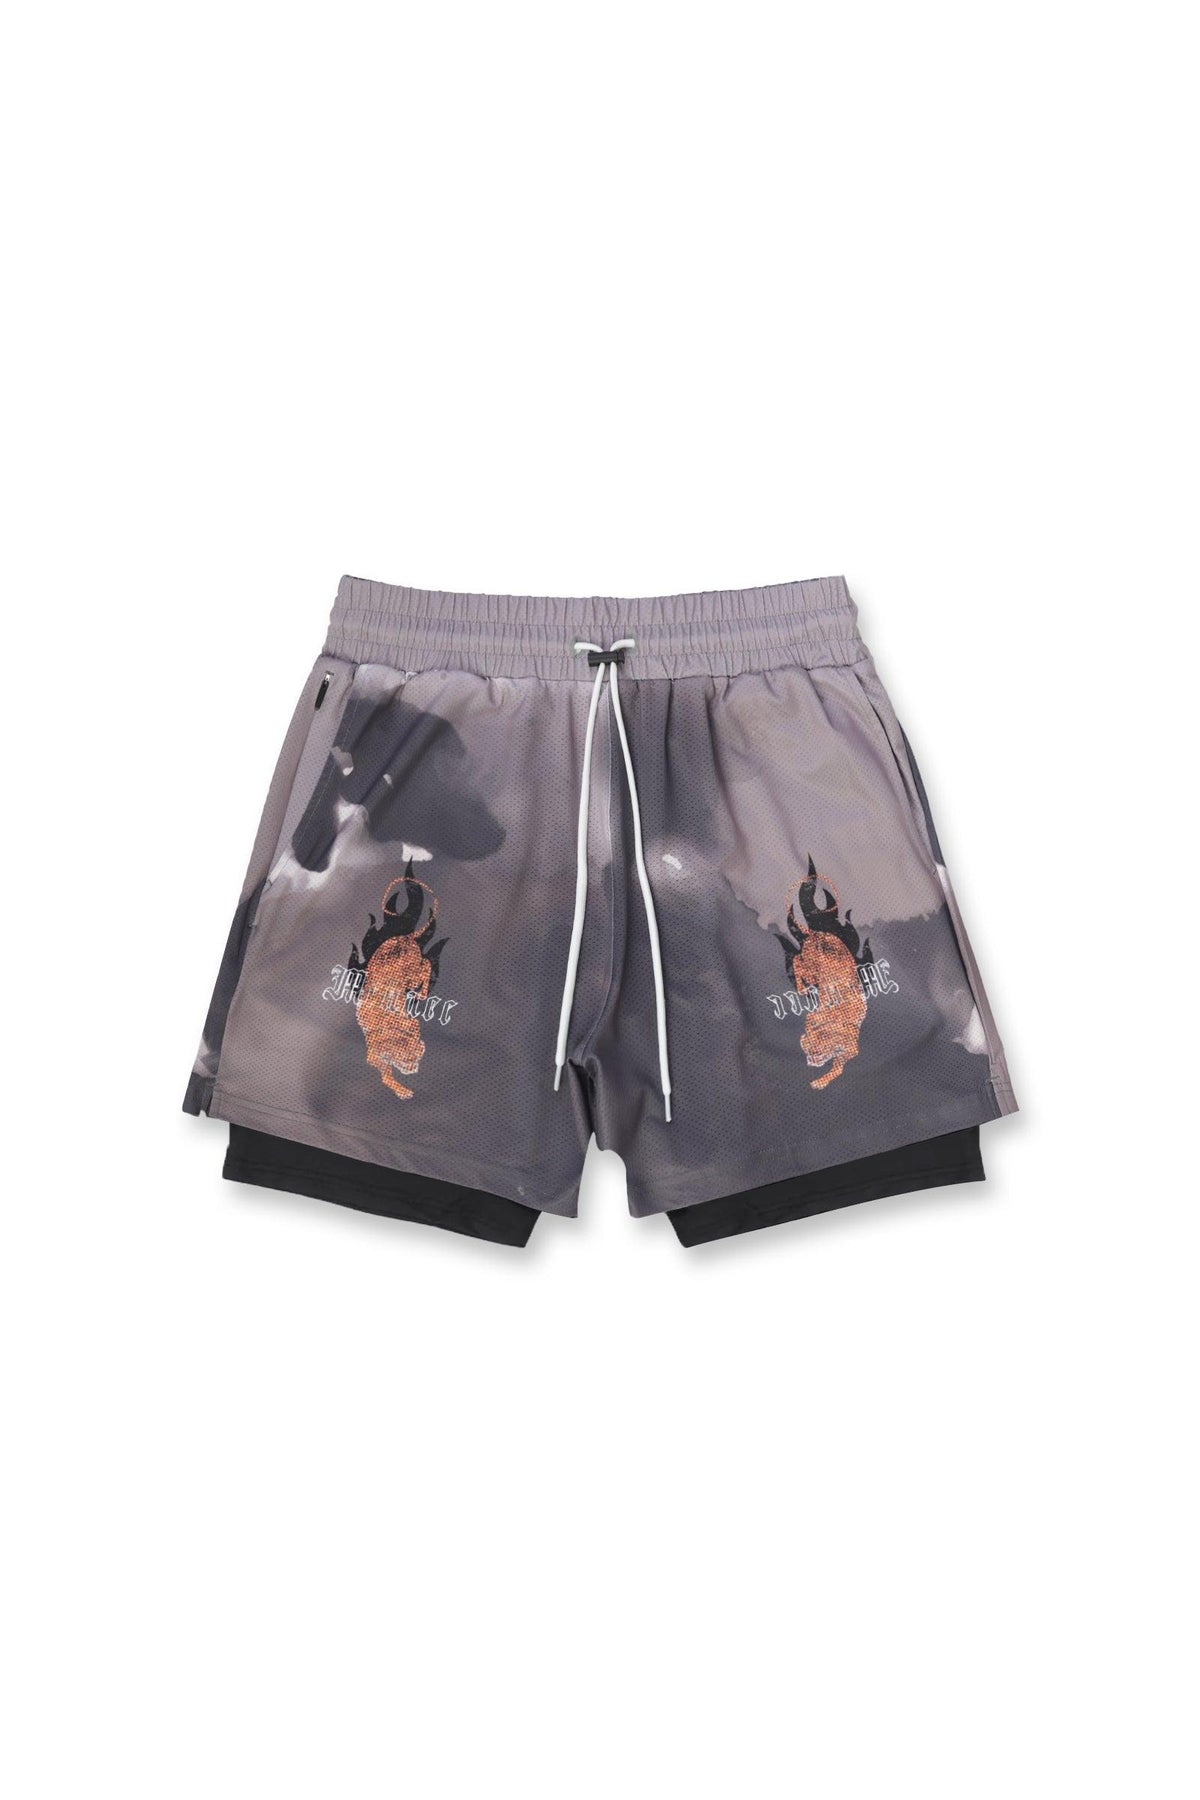 Pro 2 in 1 7" Training Shorts - Tiger Inferno